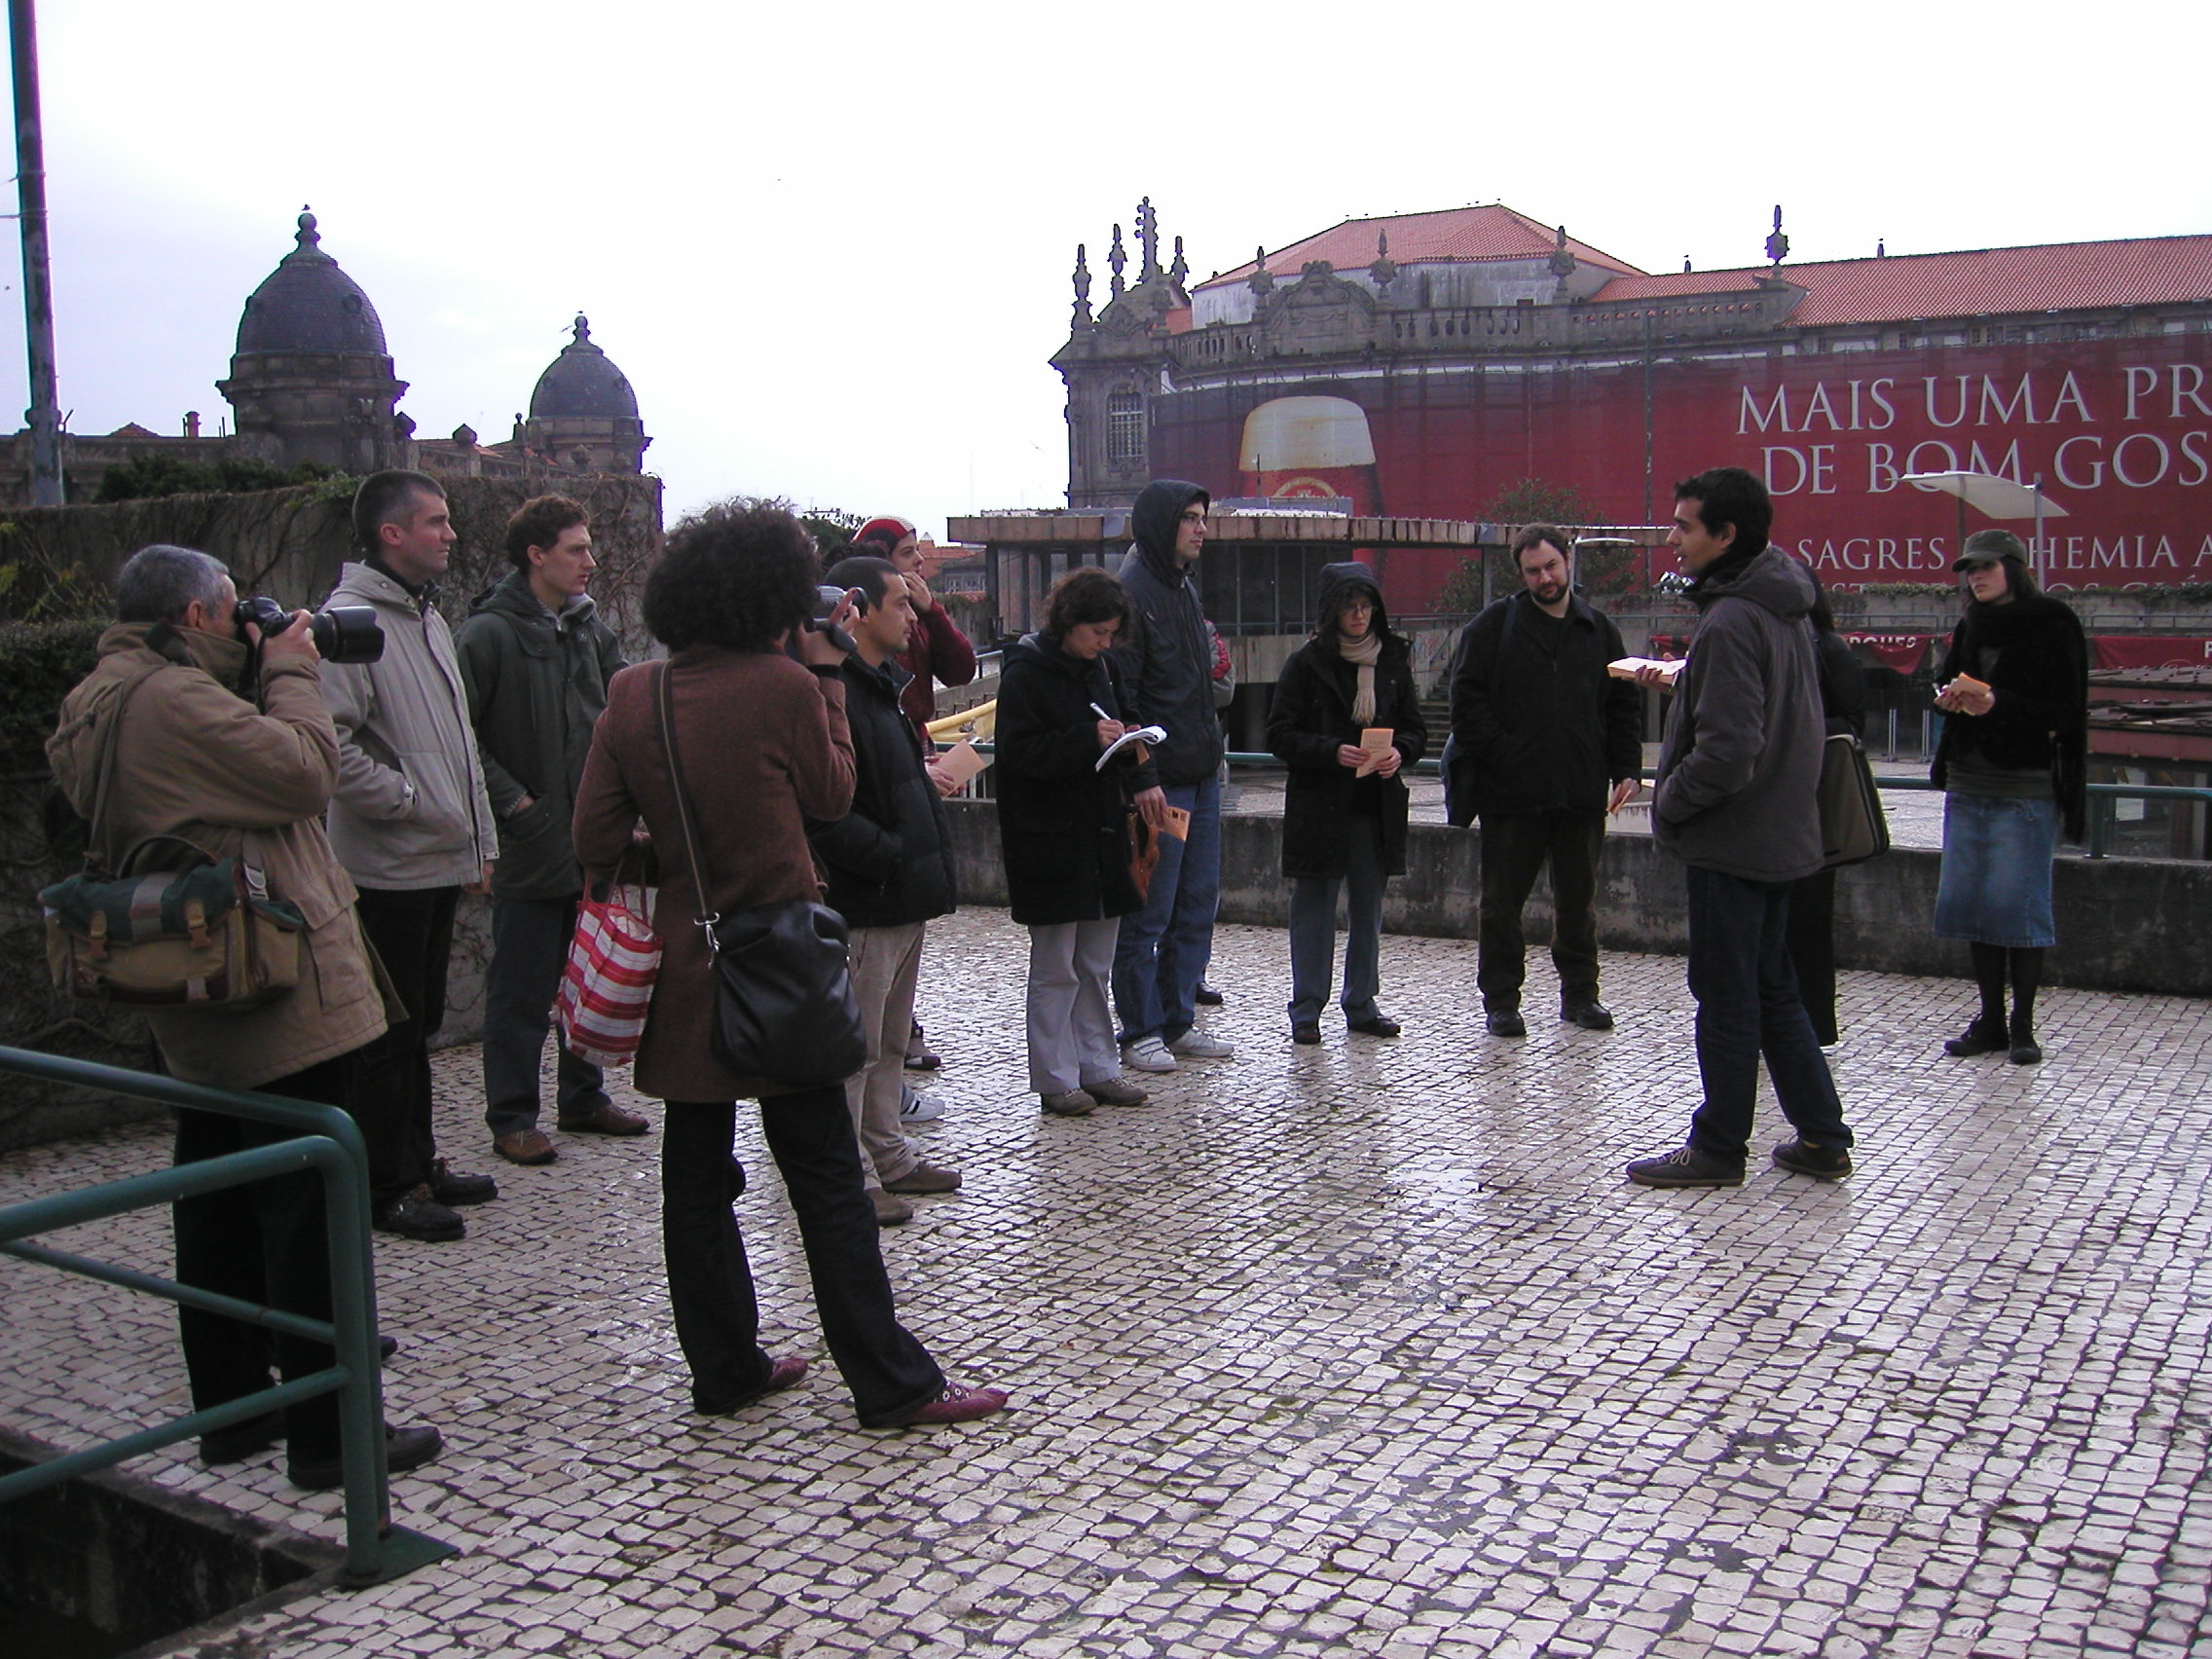 guided tour with Ricardo gomes - second day